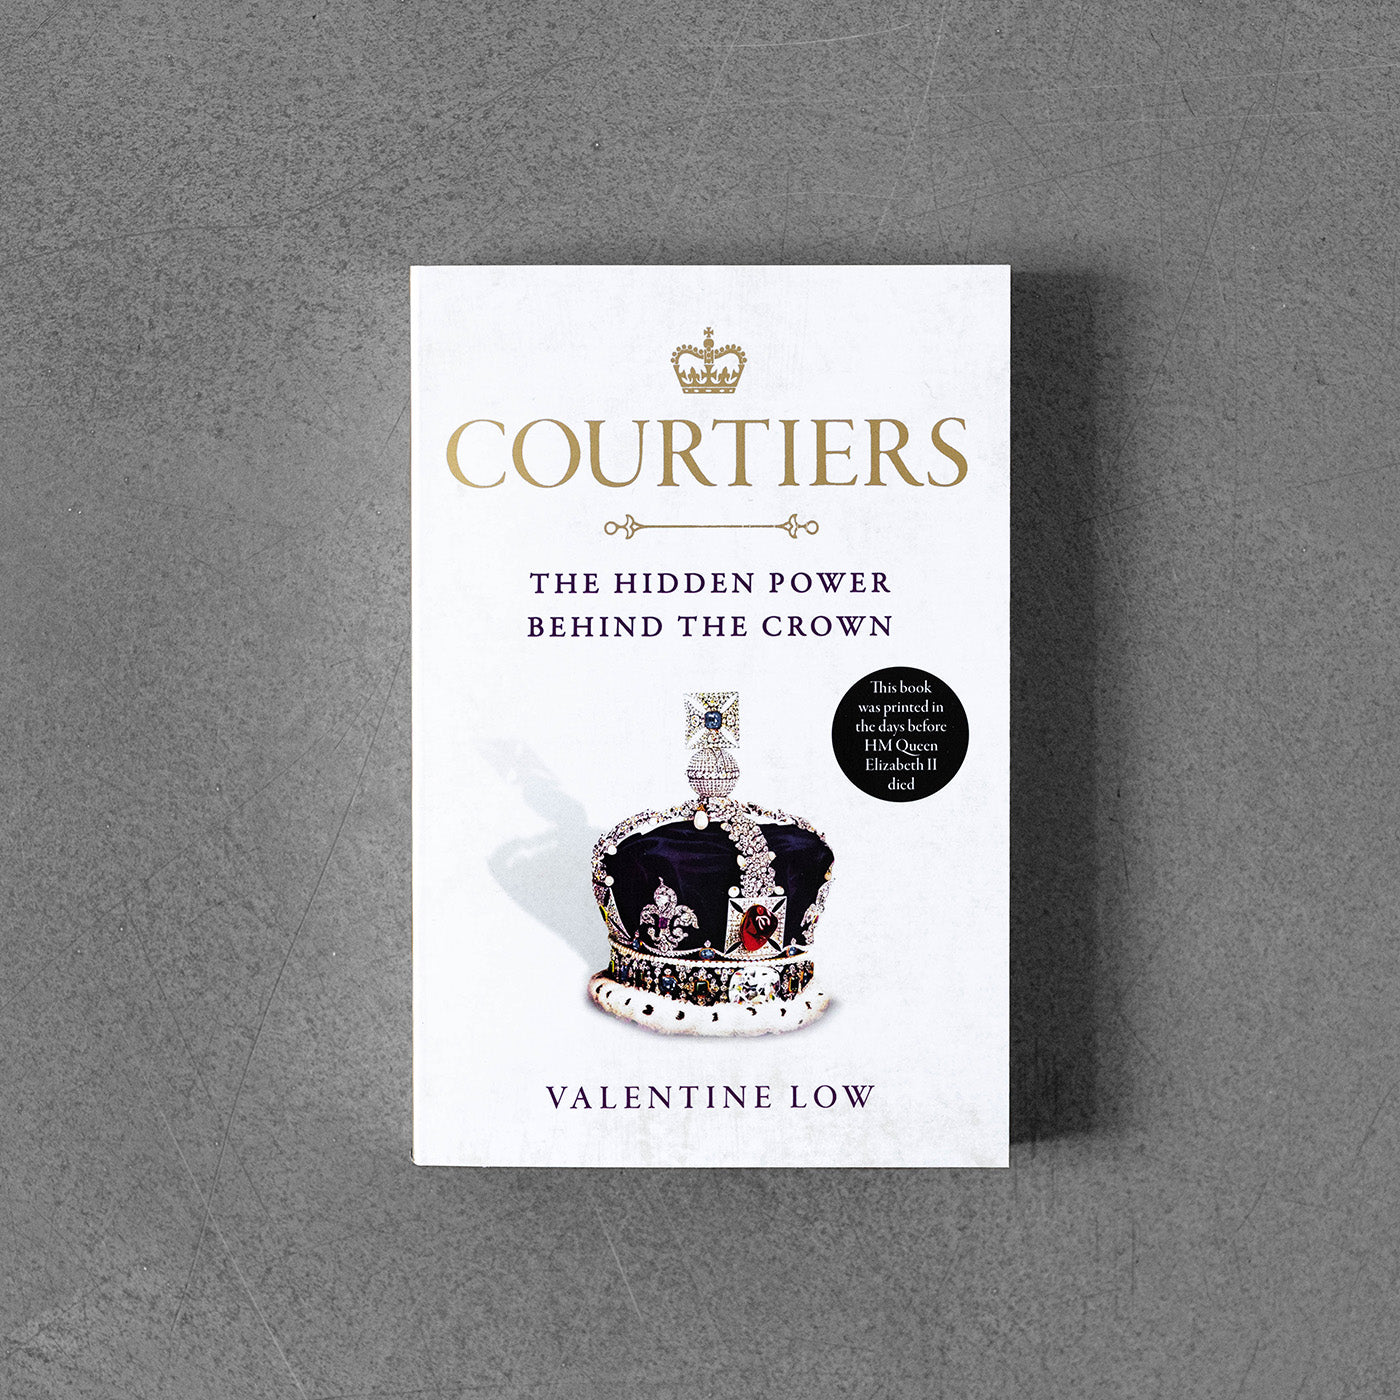 Courtiers : The inside story of the Palace power struggles from the Royal correspondent who revealed the bullying allegations